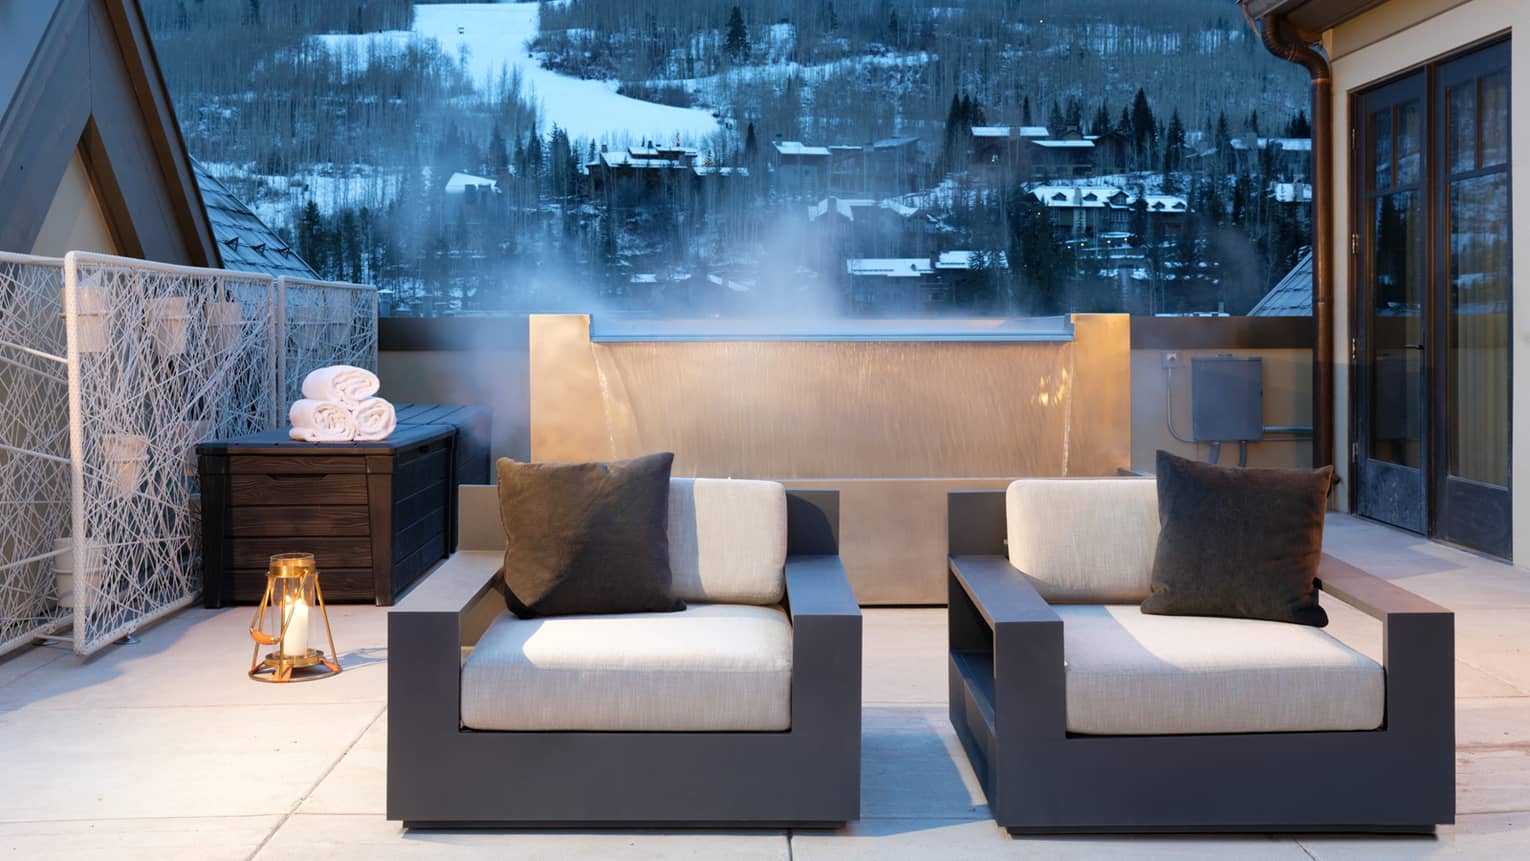 Plush patio armchairs in front of steaming fountain, snowy mountains in background